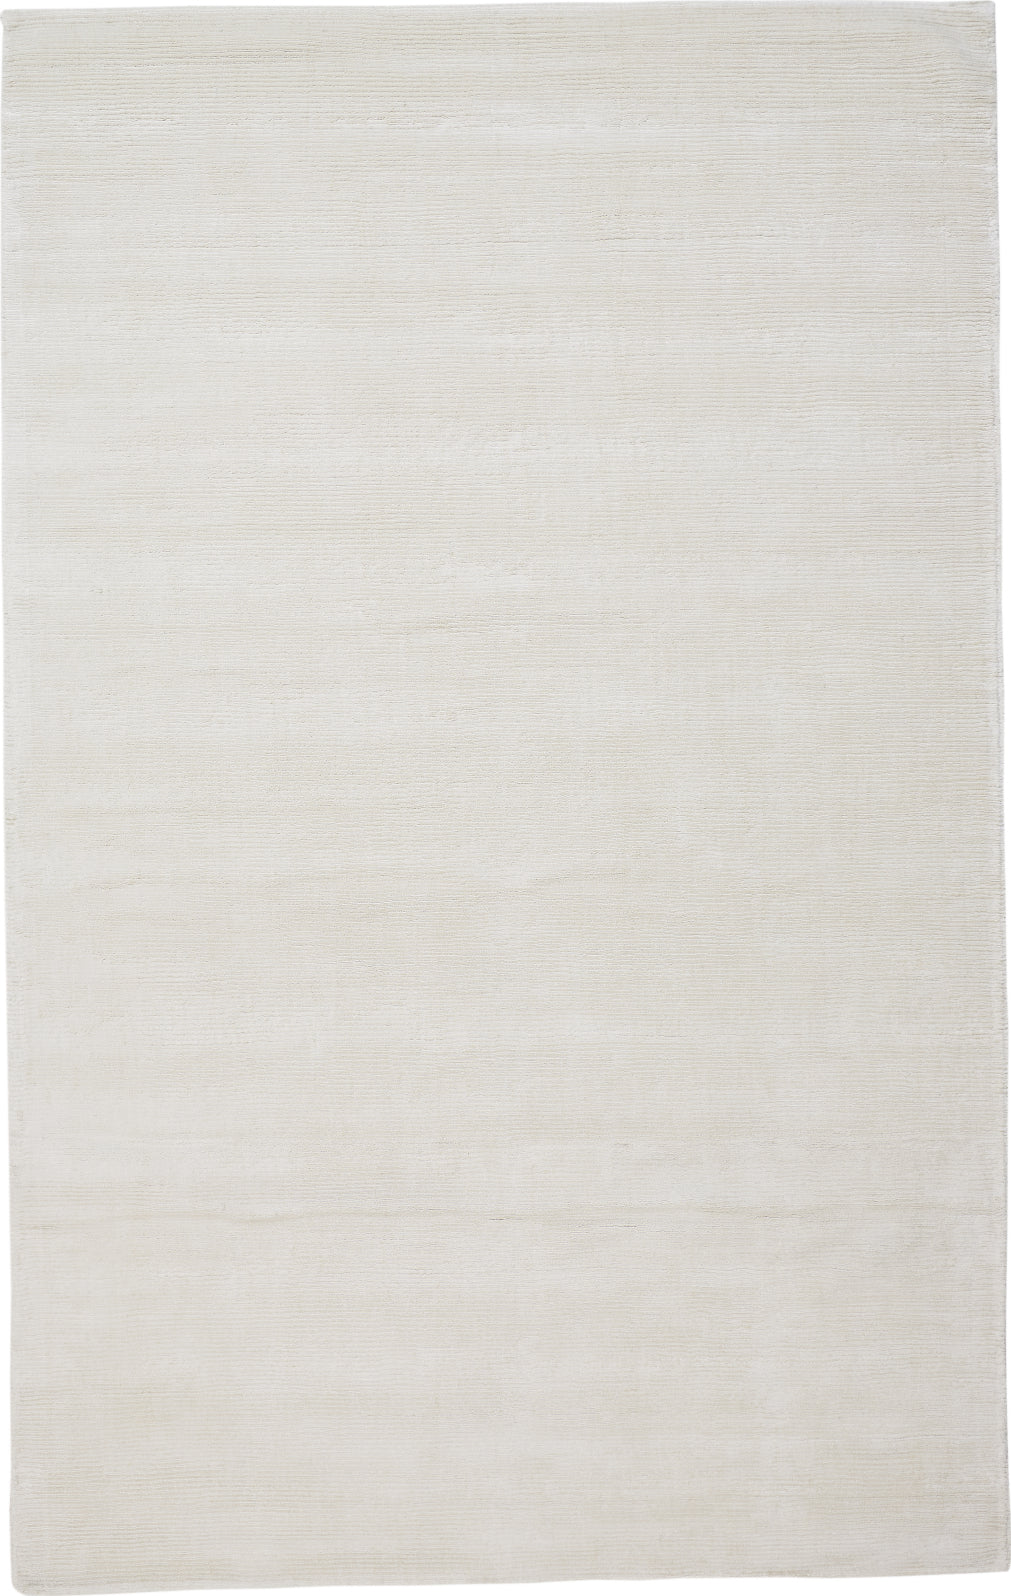 Feizy Batisse 8717F White Area Rug Lifestyle Image Feature